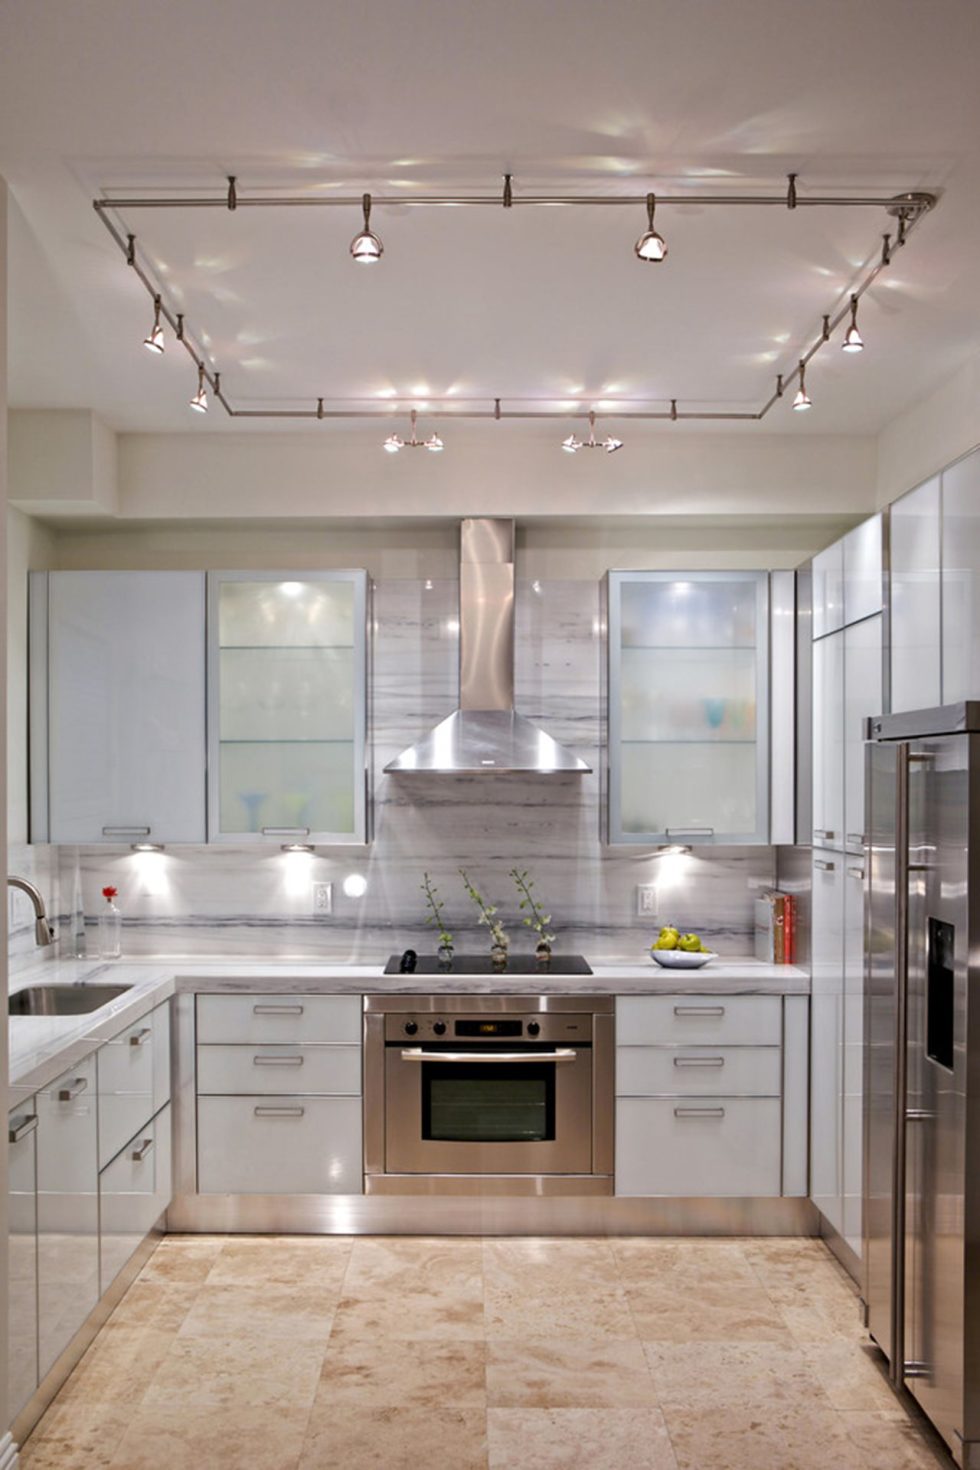 Kitchen in high-tech style - an example of lighting